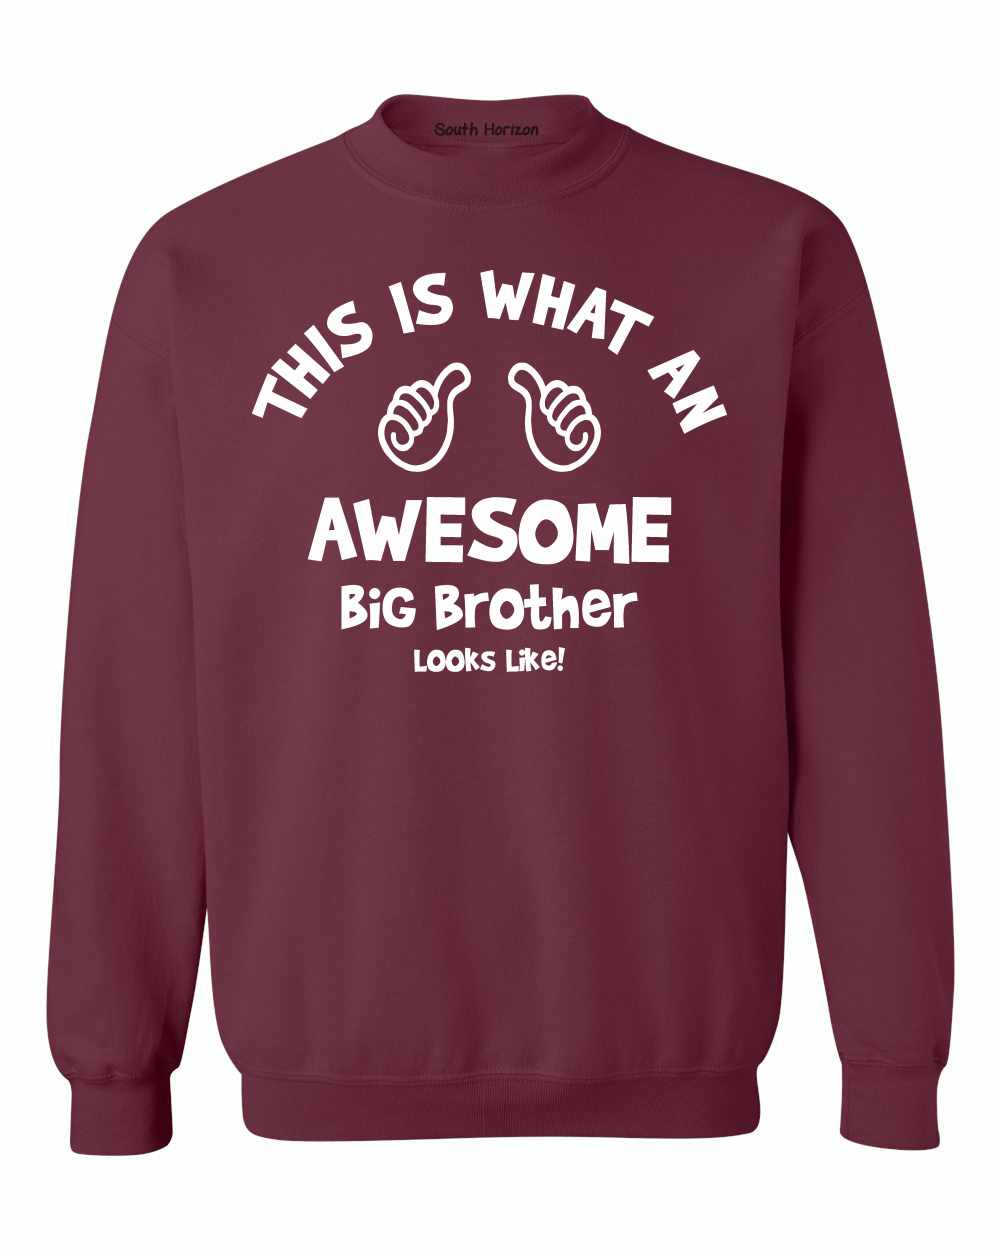 This is What an AWESOME BIG BROTHER Looks Like Sweat Shirt (#964-11)